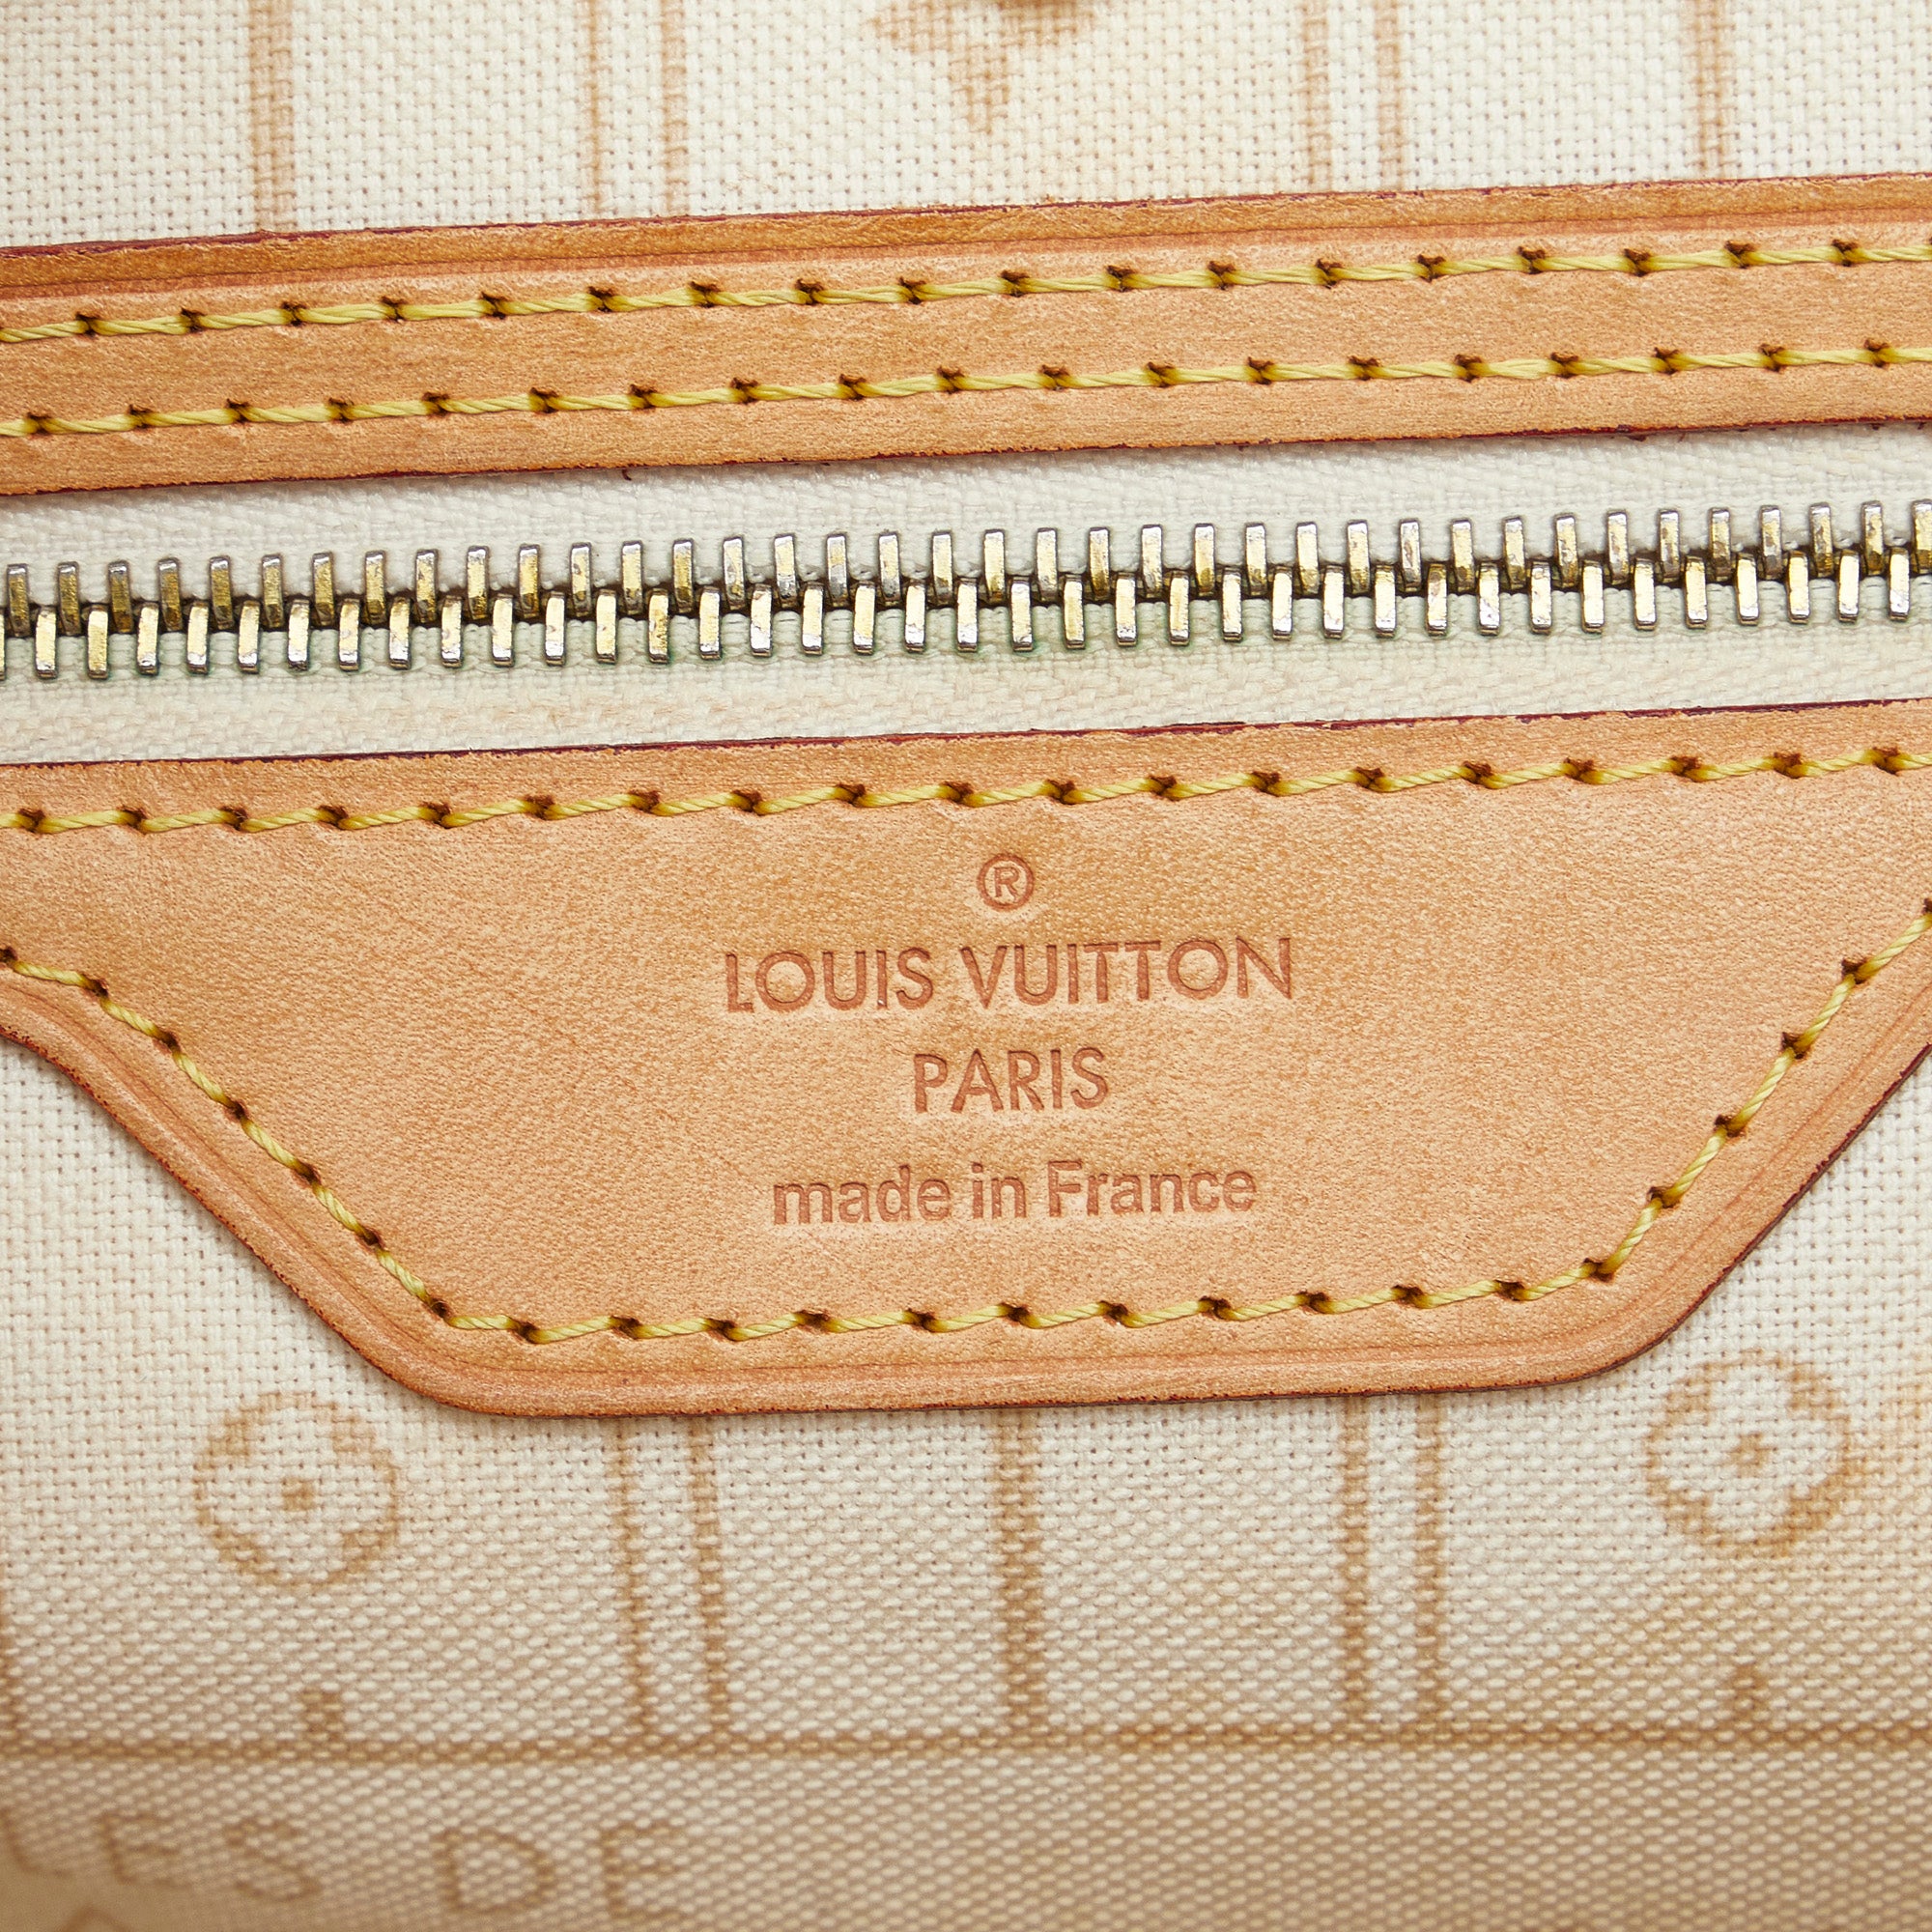 Carryall bag is the new Neverfull? : r/Louisvuitton